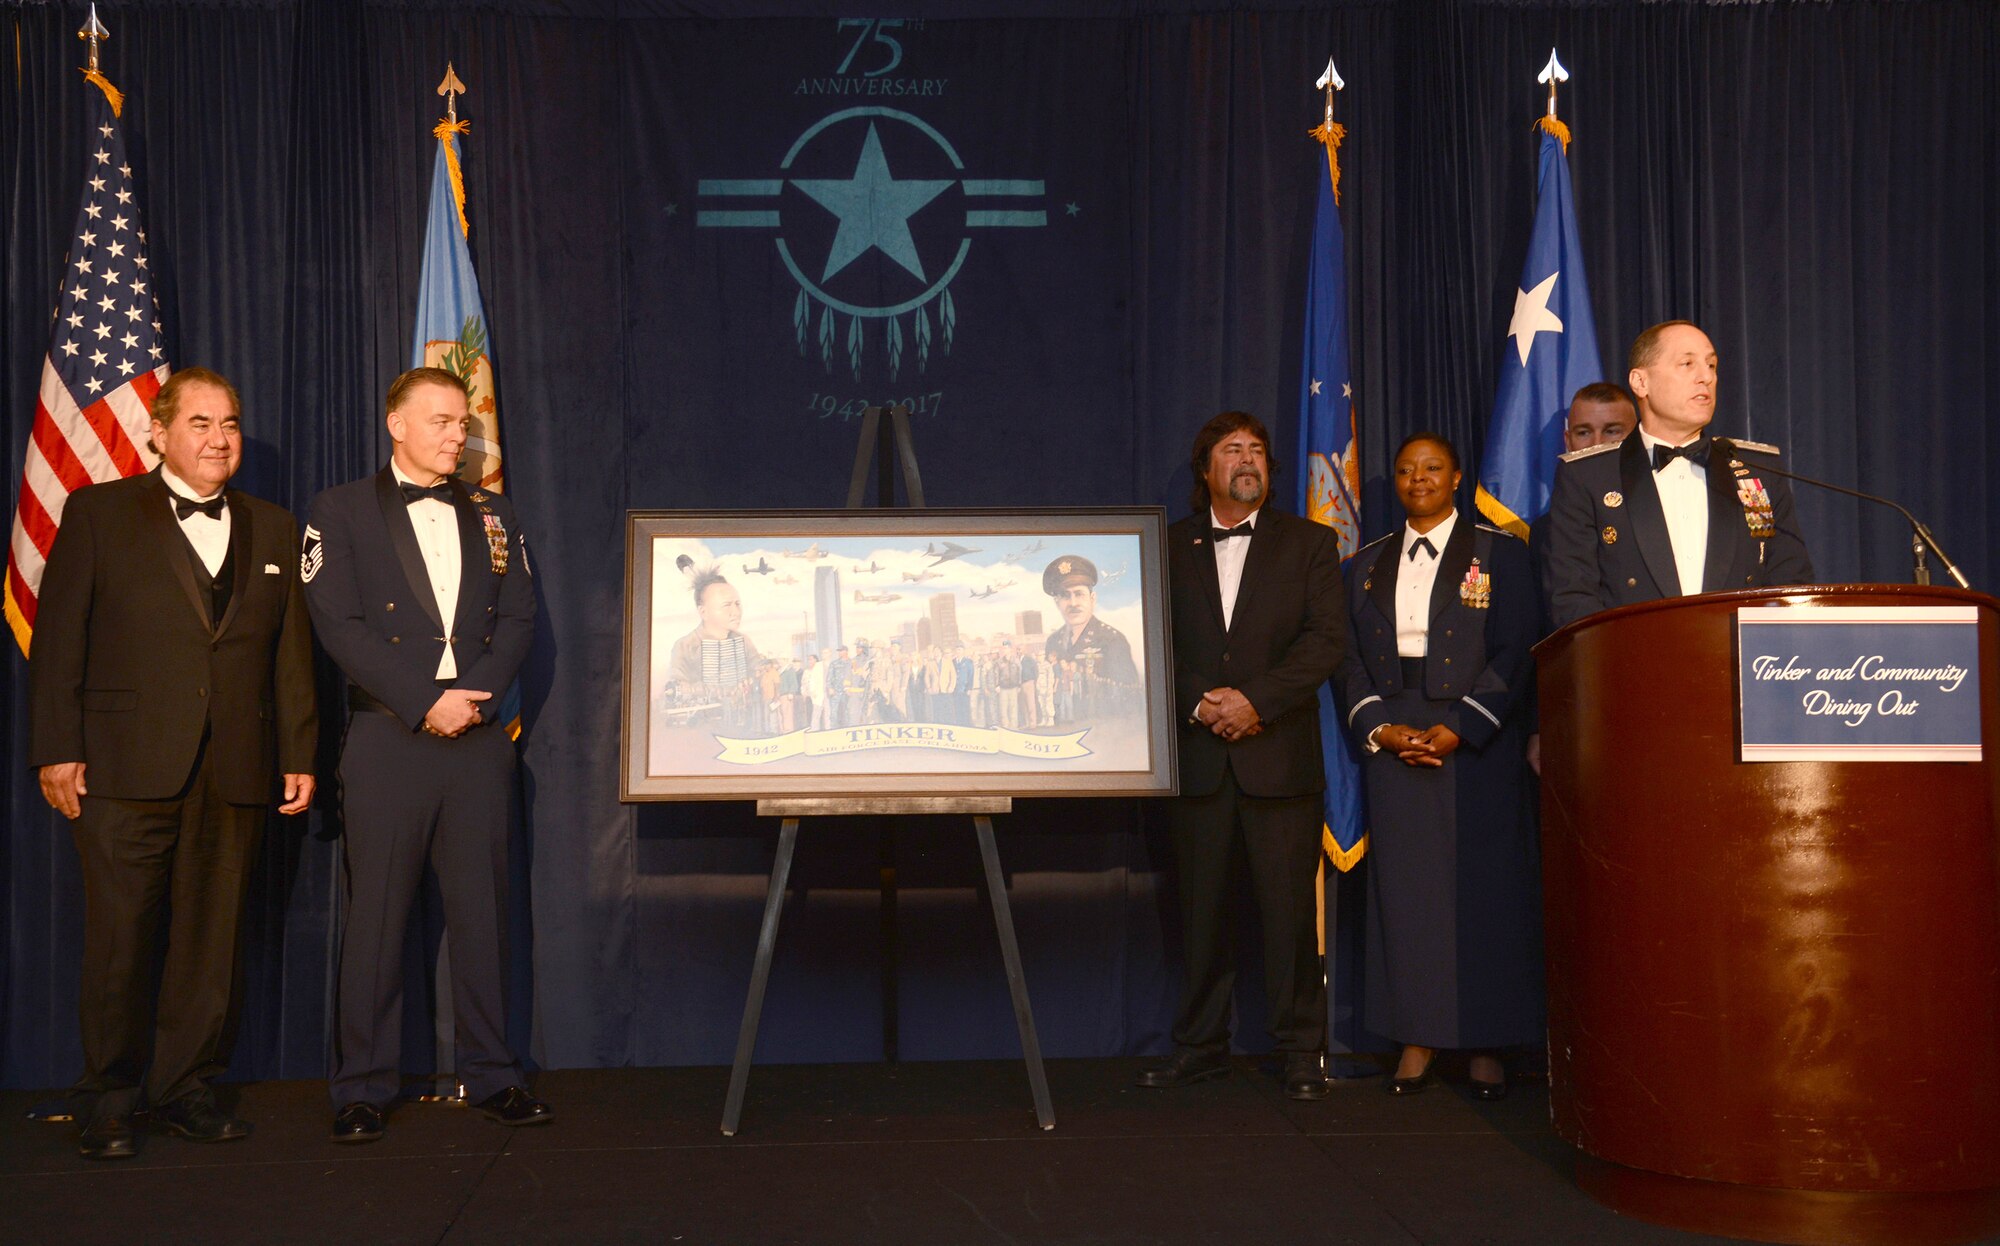 As part of Tinker's 75th Anniversary festivities, the Tinker and Community Dining Out was held at The Skirvin Hilton in downtown Oklahoma City Apr. 7. Oklahoma State Gov. Mary Fallin was the featured speaker at the black-tie event. A commissioned painting commemorating the 75th anniversary of Tinker Air Force Base, and painted by one of Tinker's own, Senior Master Sgt. Darby Perrin, with the 507th Air Refueling Wing, was unveiled during the celebration.